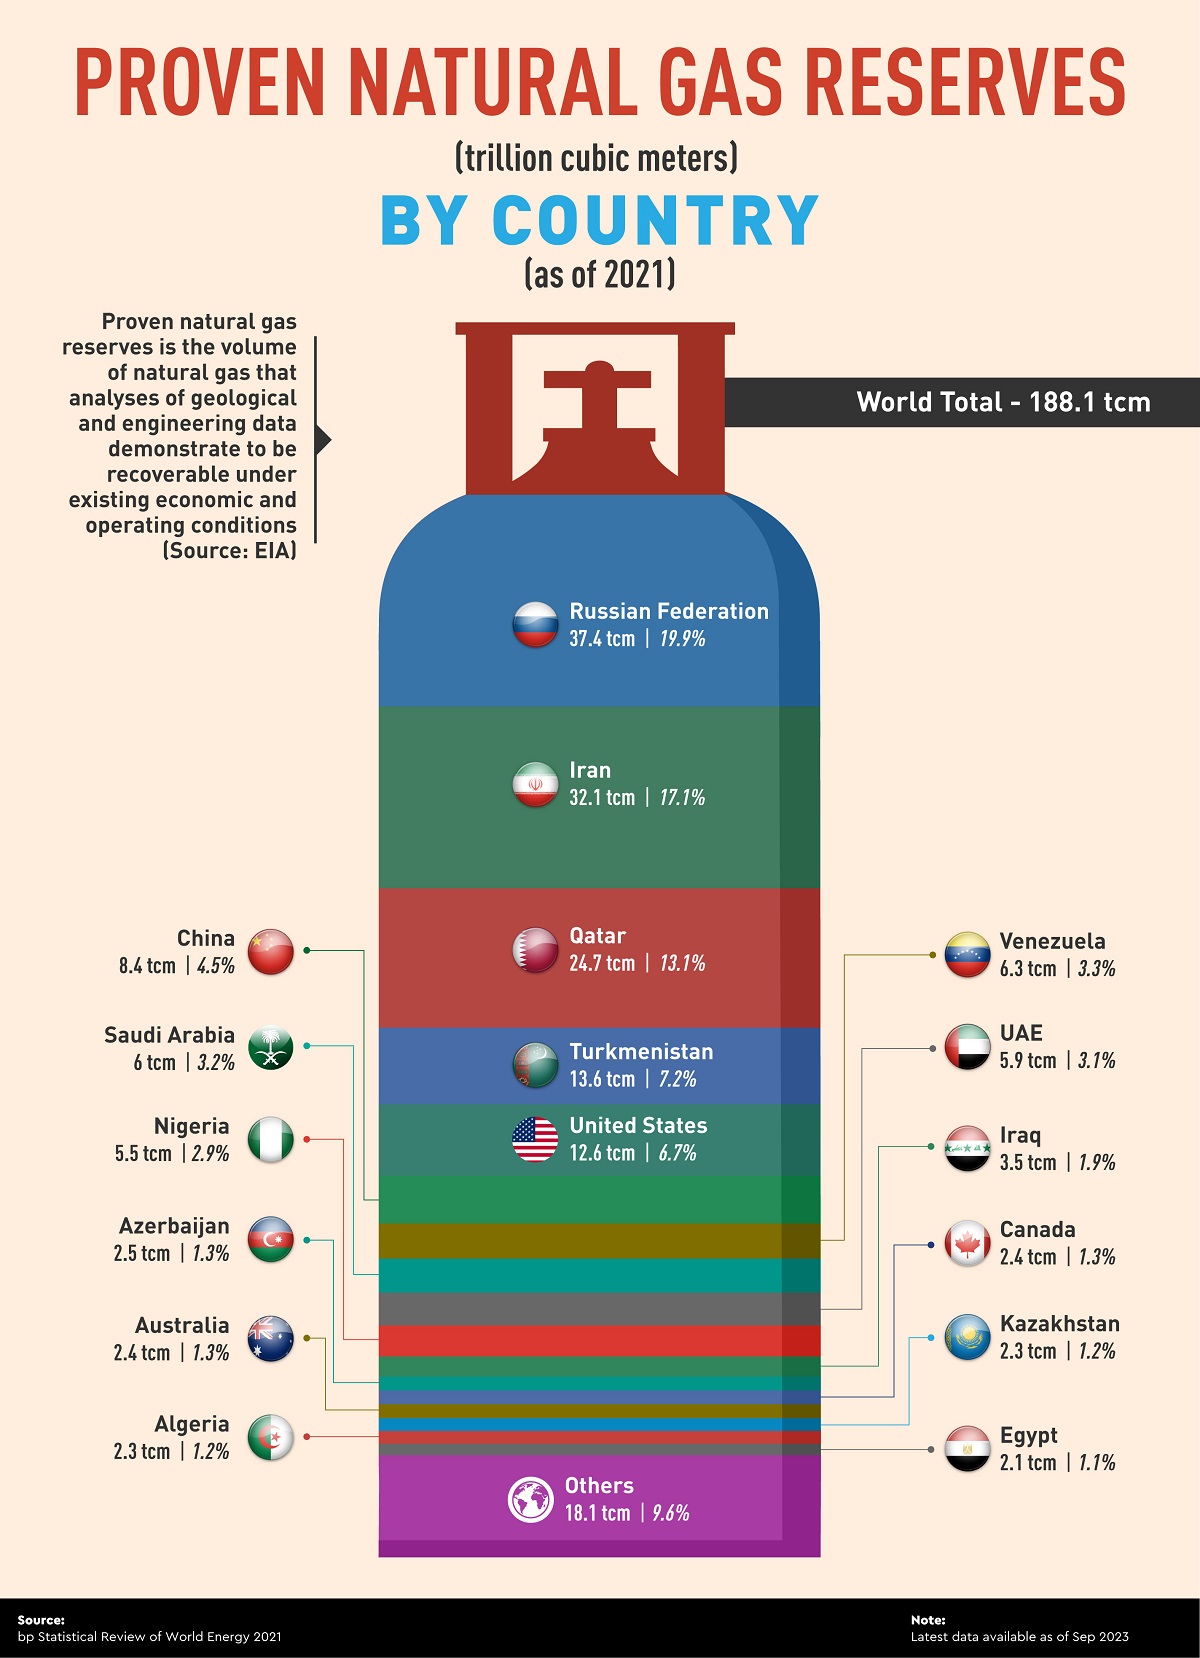 Stacked bar chart showing proven natural gas reserves by country.